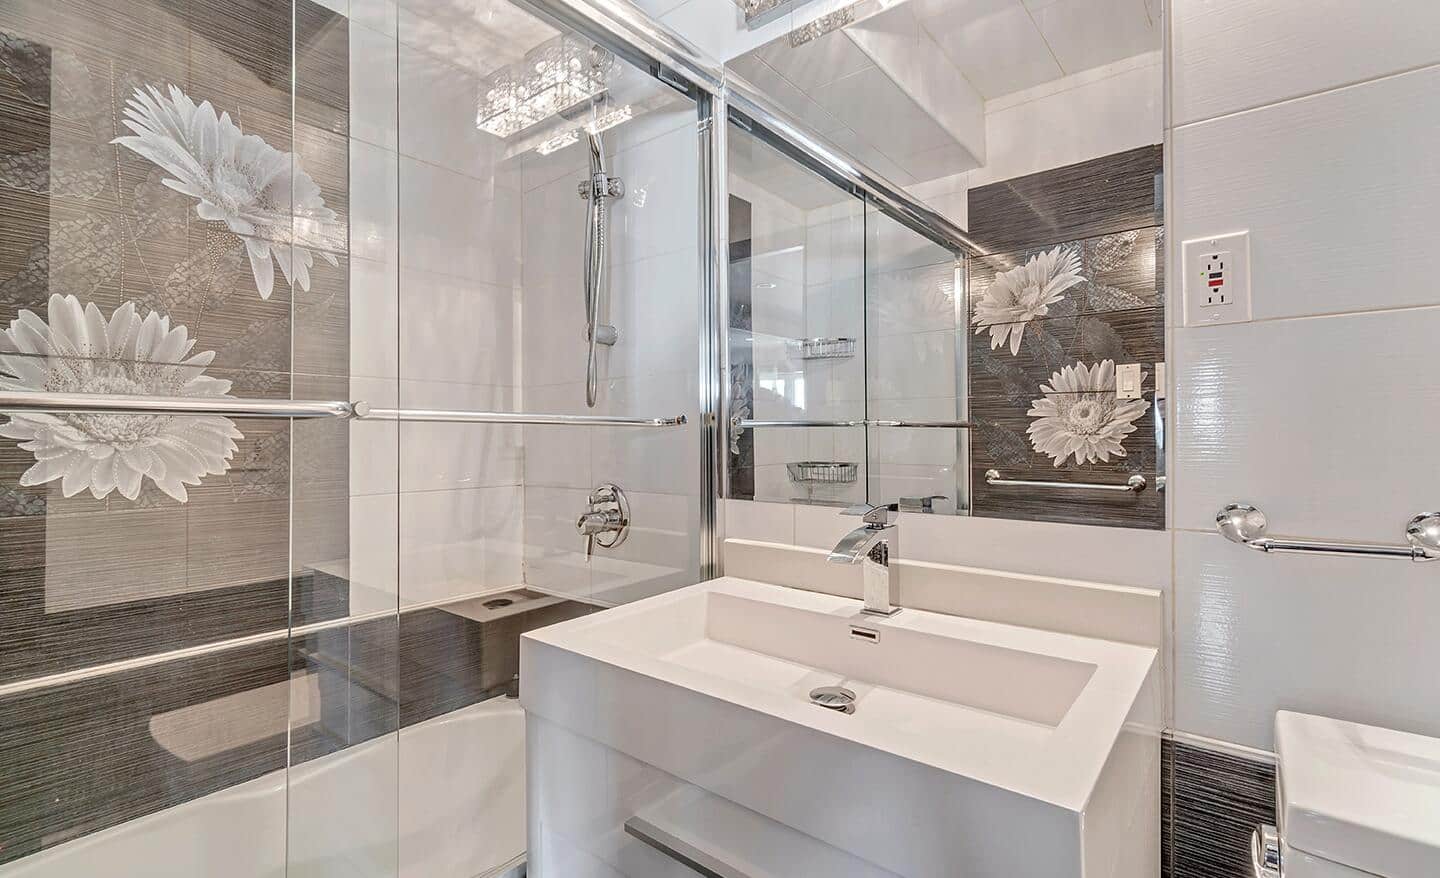 A modern shower featuring a large floral design.